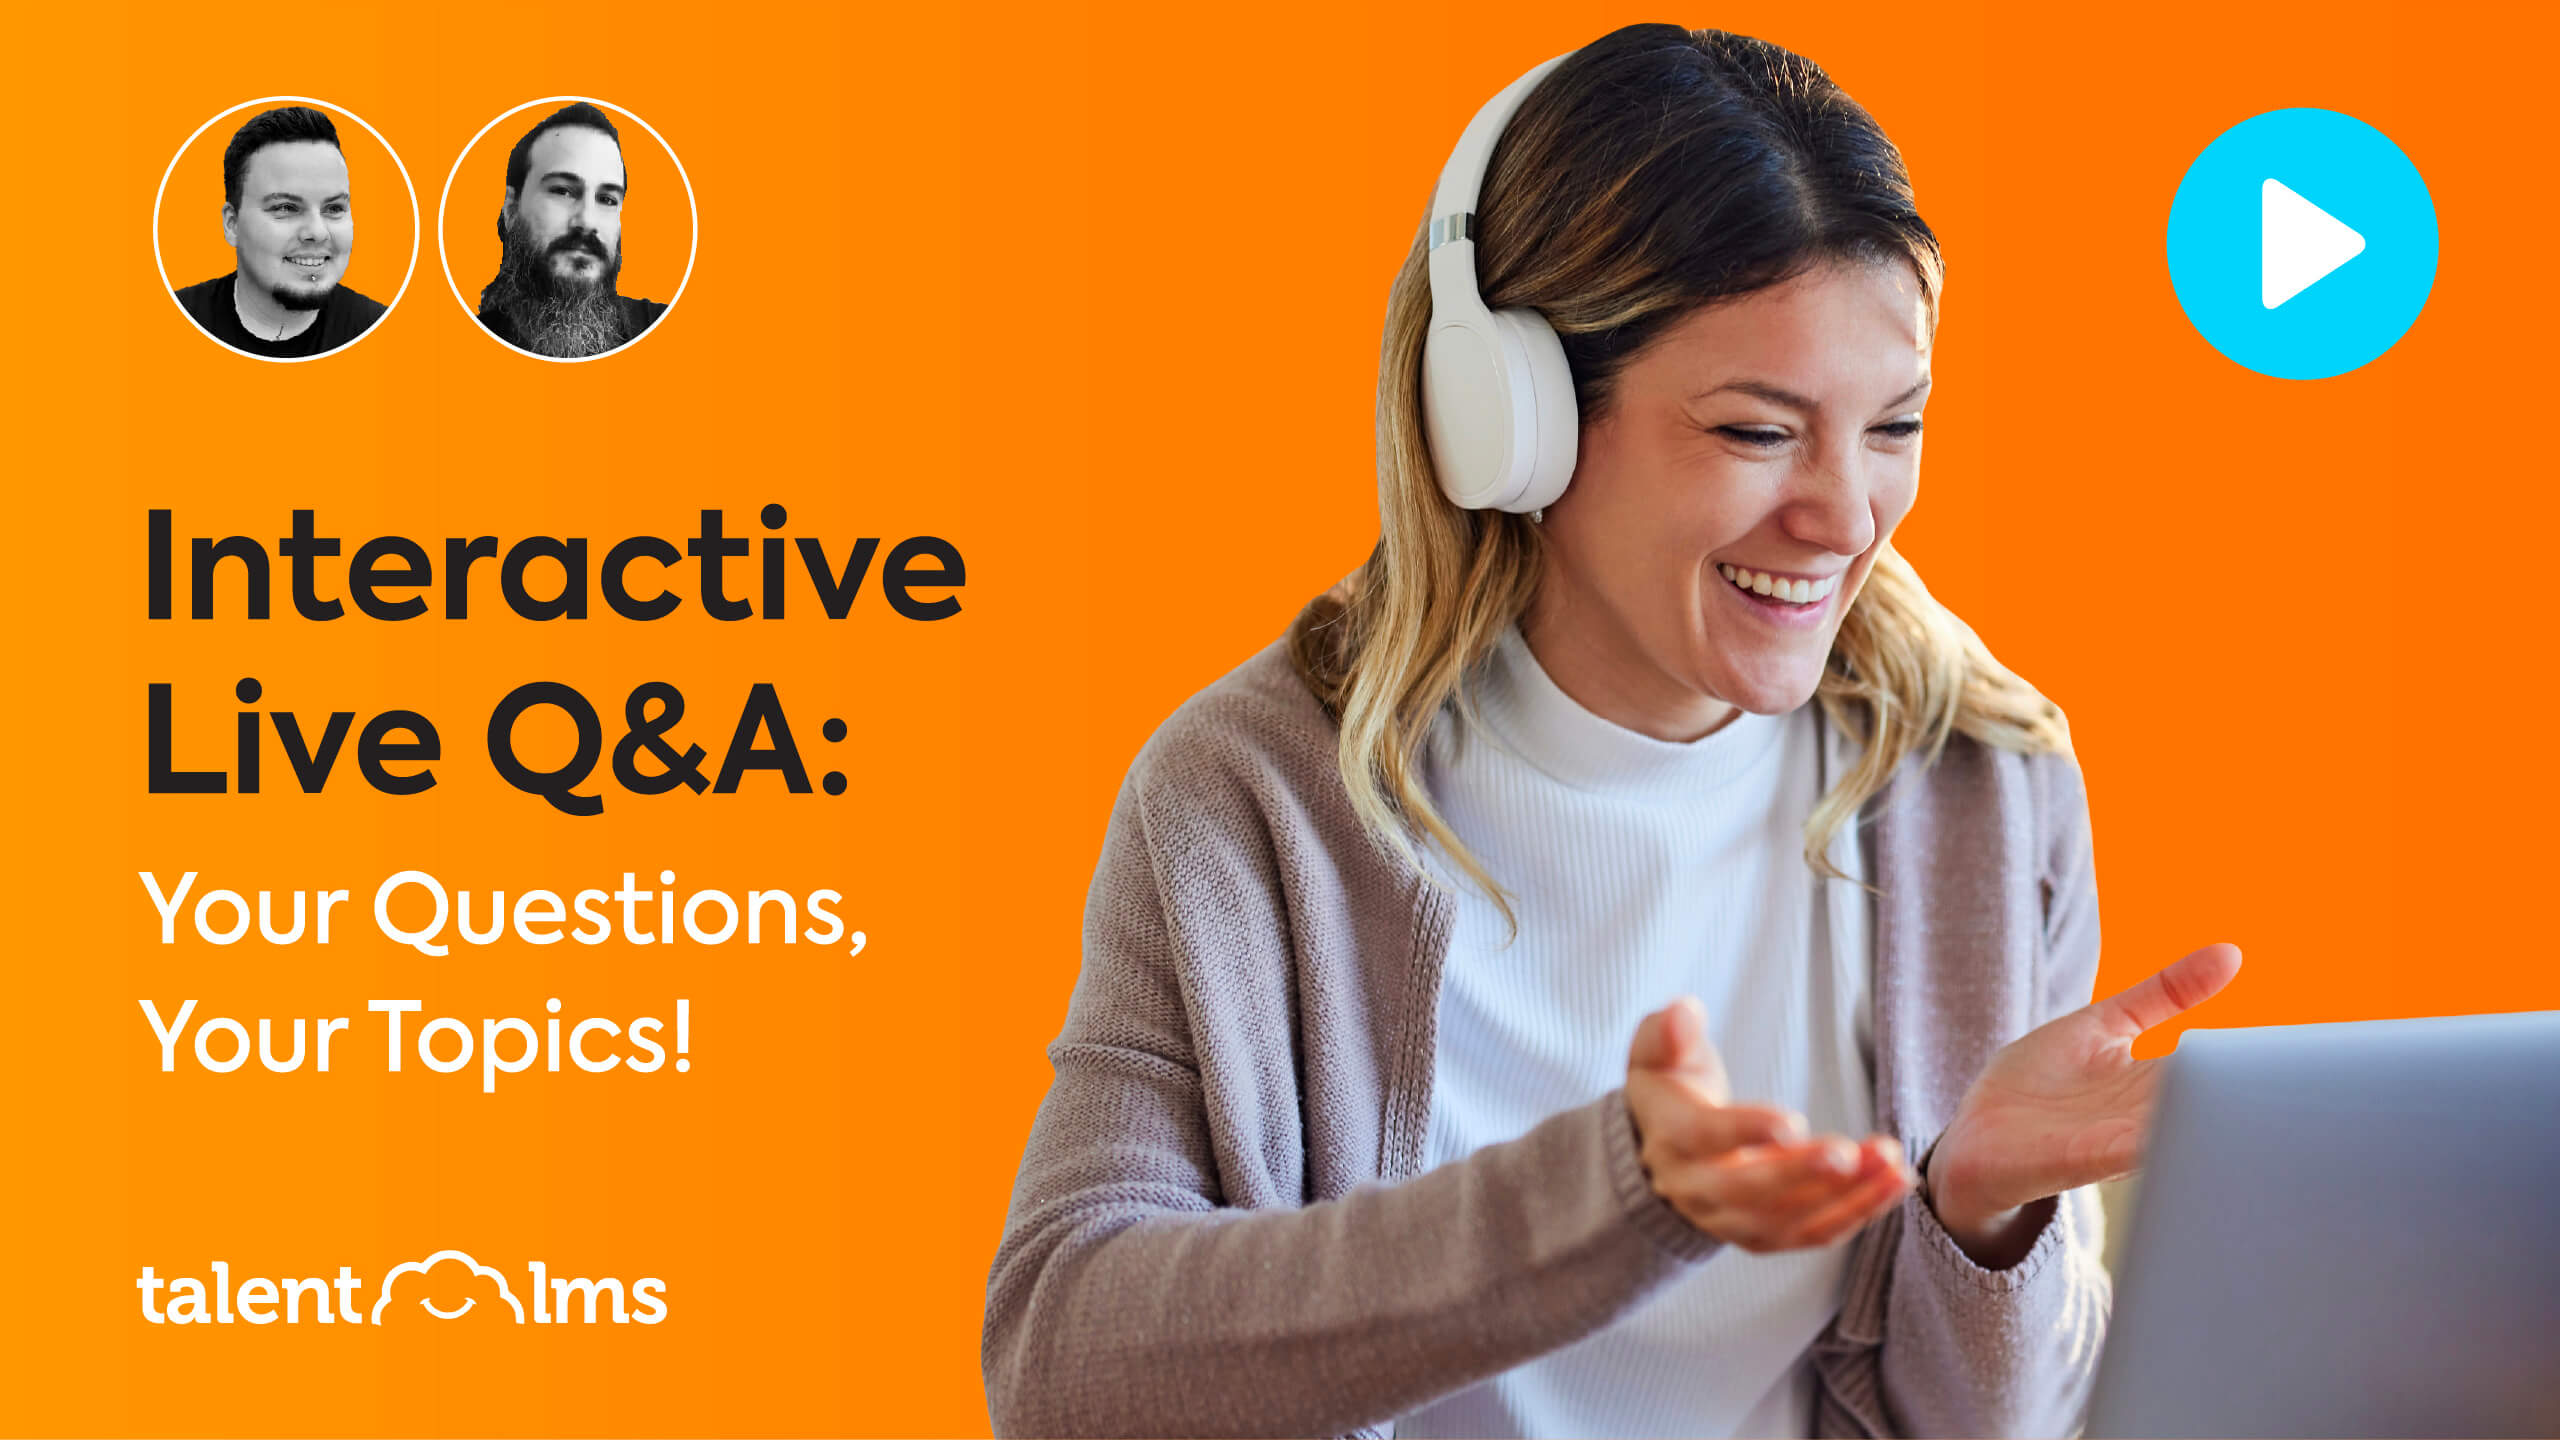 Interactive Live Q&A: Your Questions, Your Topics!